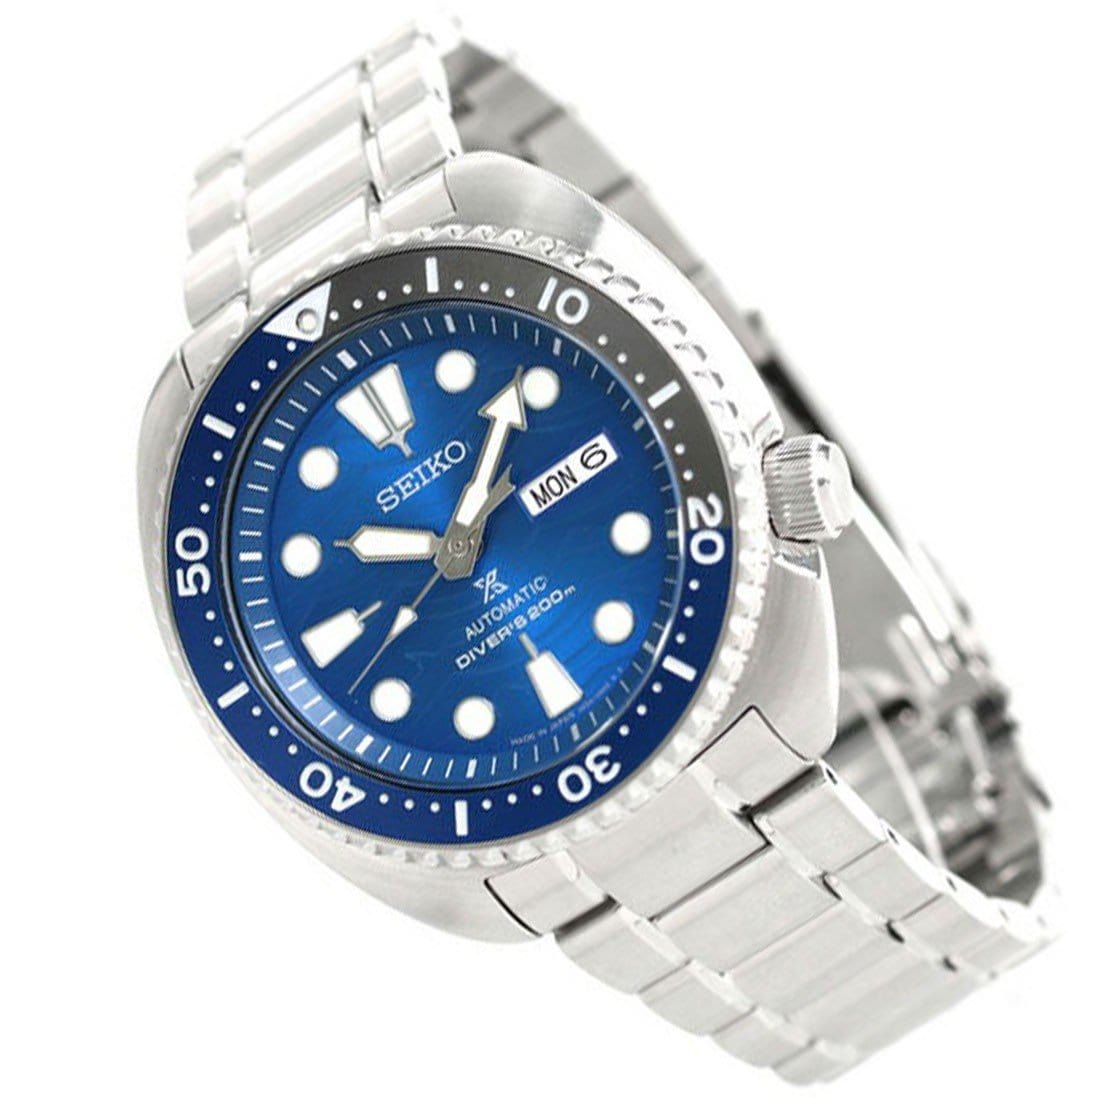 SBDY031 Seiko Prospex Special Edition Automatic 200M Analog Mens Sports Watch